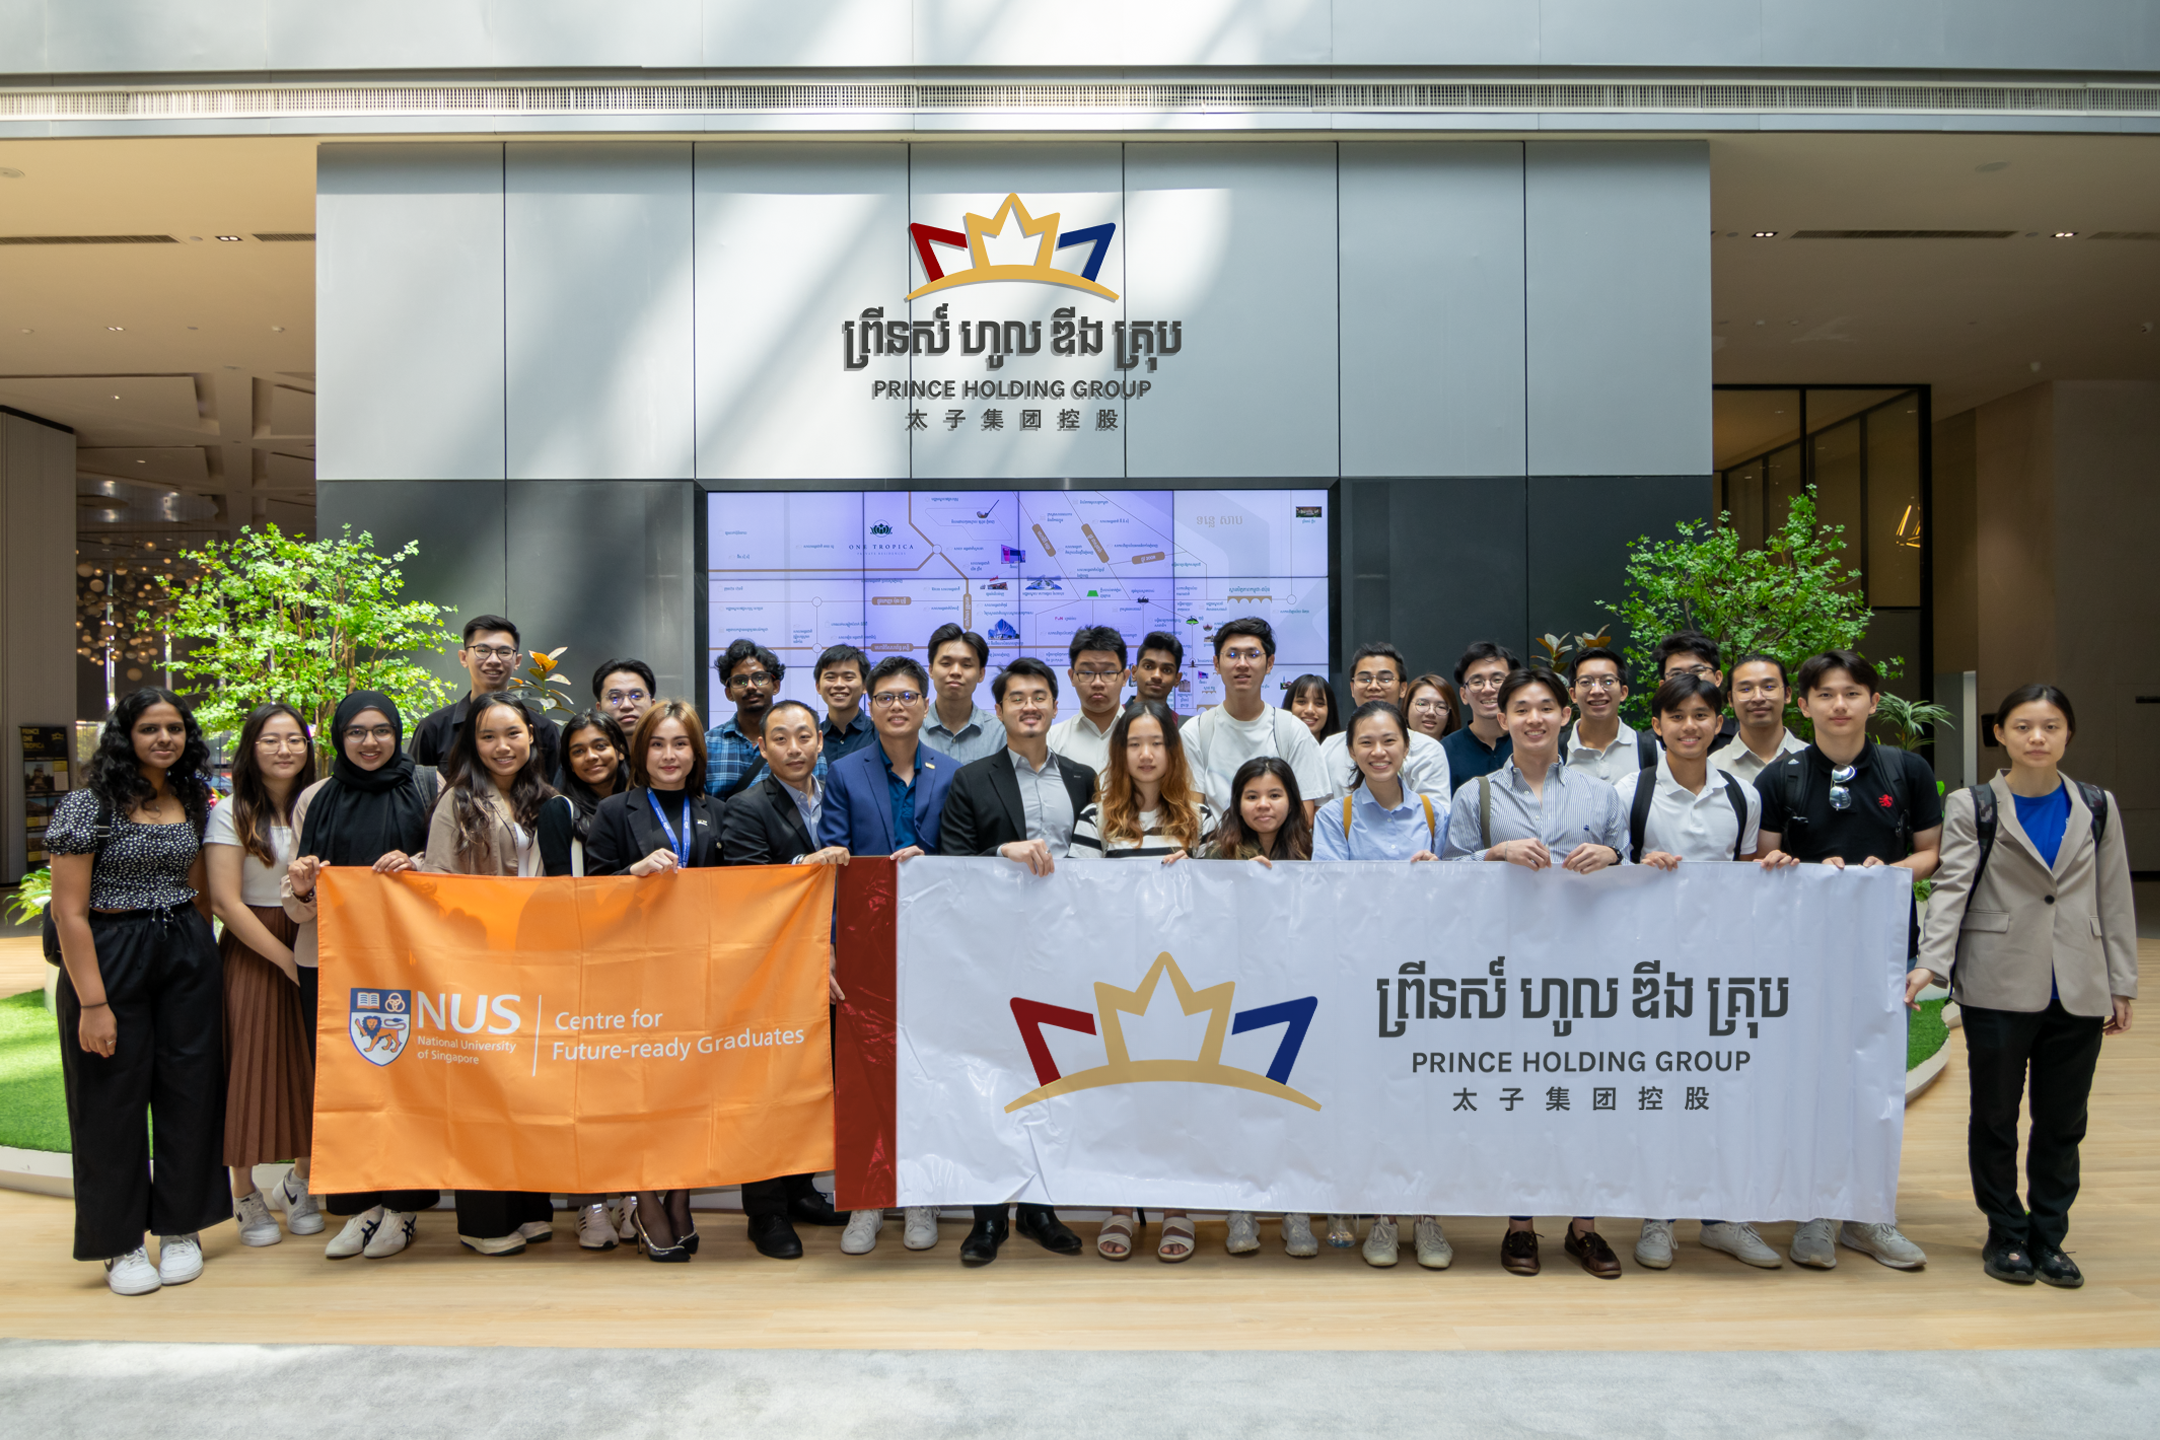 Students from the National University of Singapore (NUS) recently visited the headquarters of Prince Holding Group for an immersive experience through the NUS Global Industry Insights Program. During their visit, they gained firsthand insight into the major real estate projects of Prince Real Estate Group.